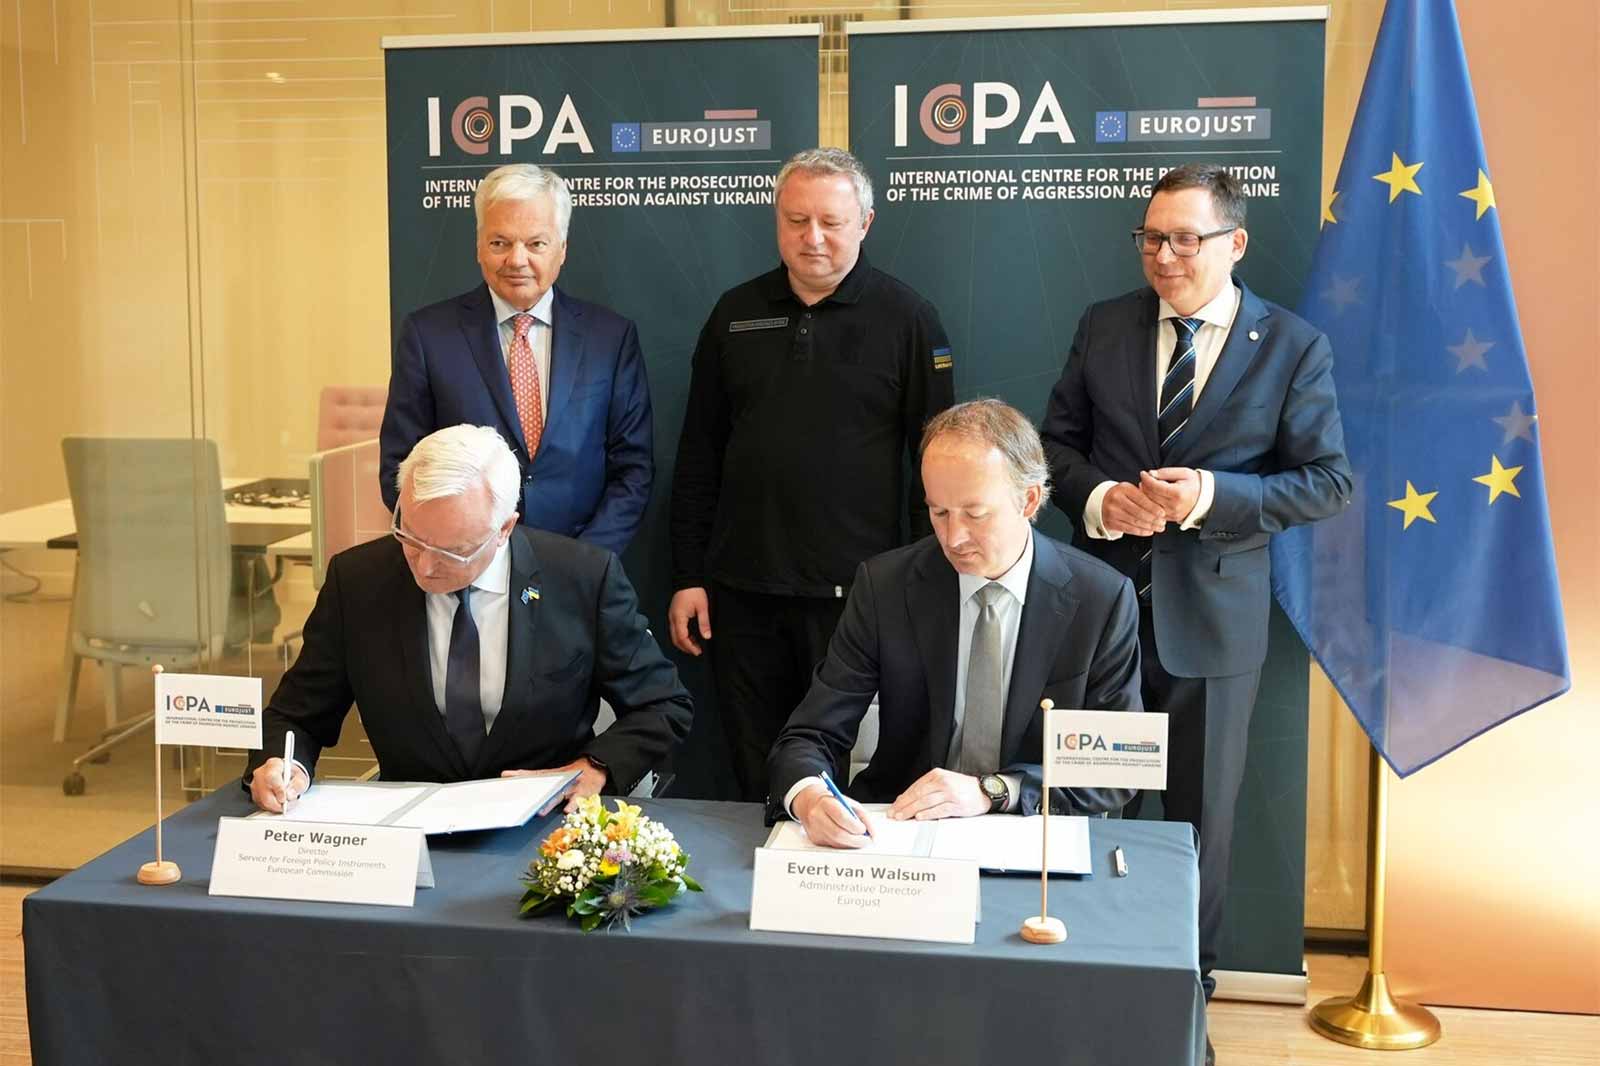 The International Centre for the Prosecution of the Crime of Aggression against Ukraine (ICPA) started its operations in the Hague, hosted by the European Union Agency for Criminal Justice Cooperation (Eurojust). © Eurojust